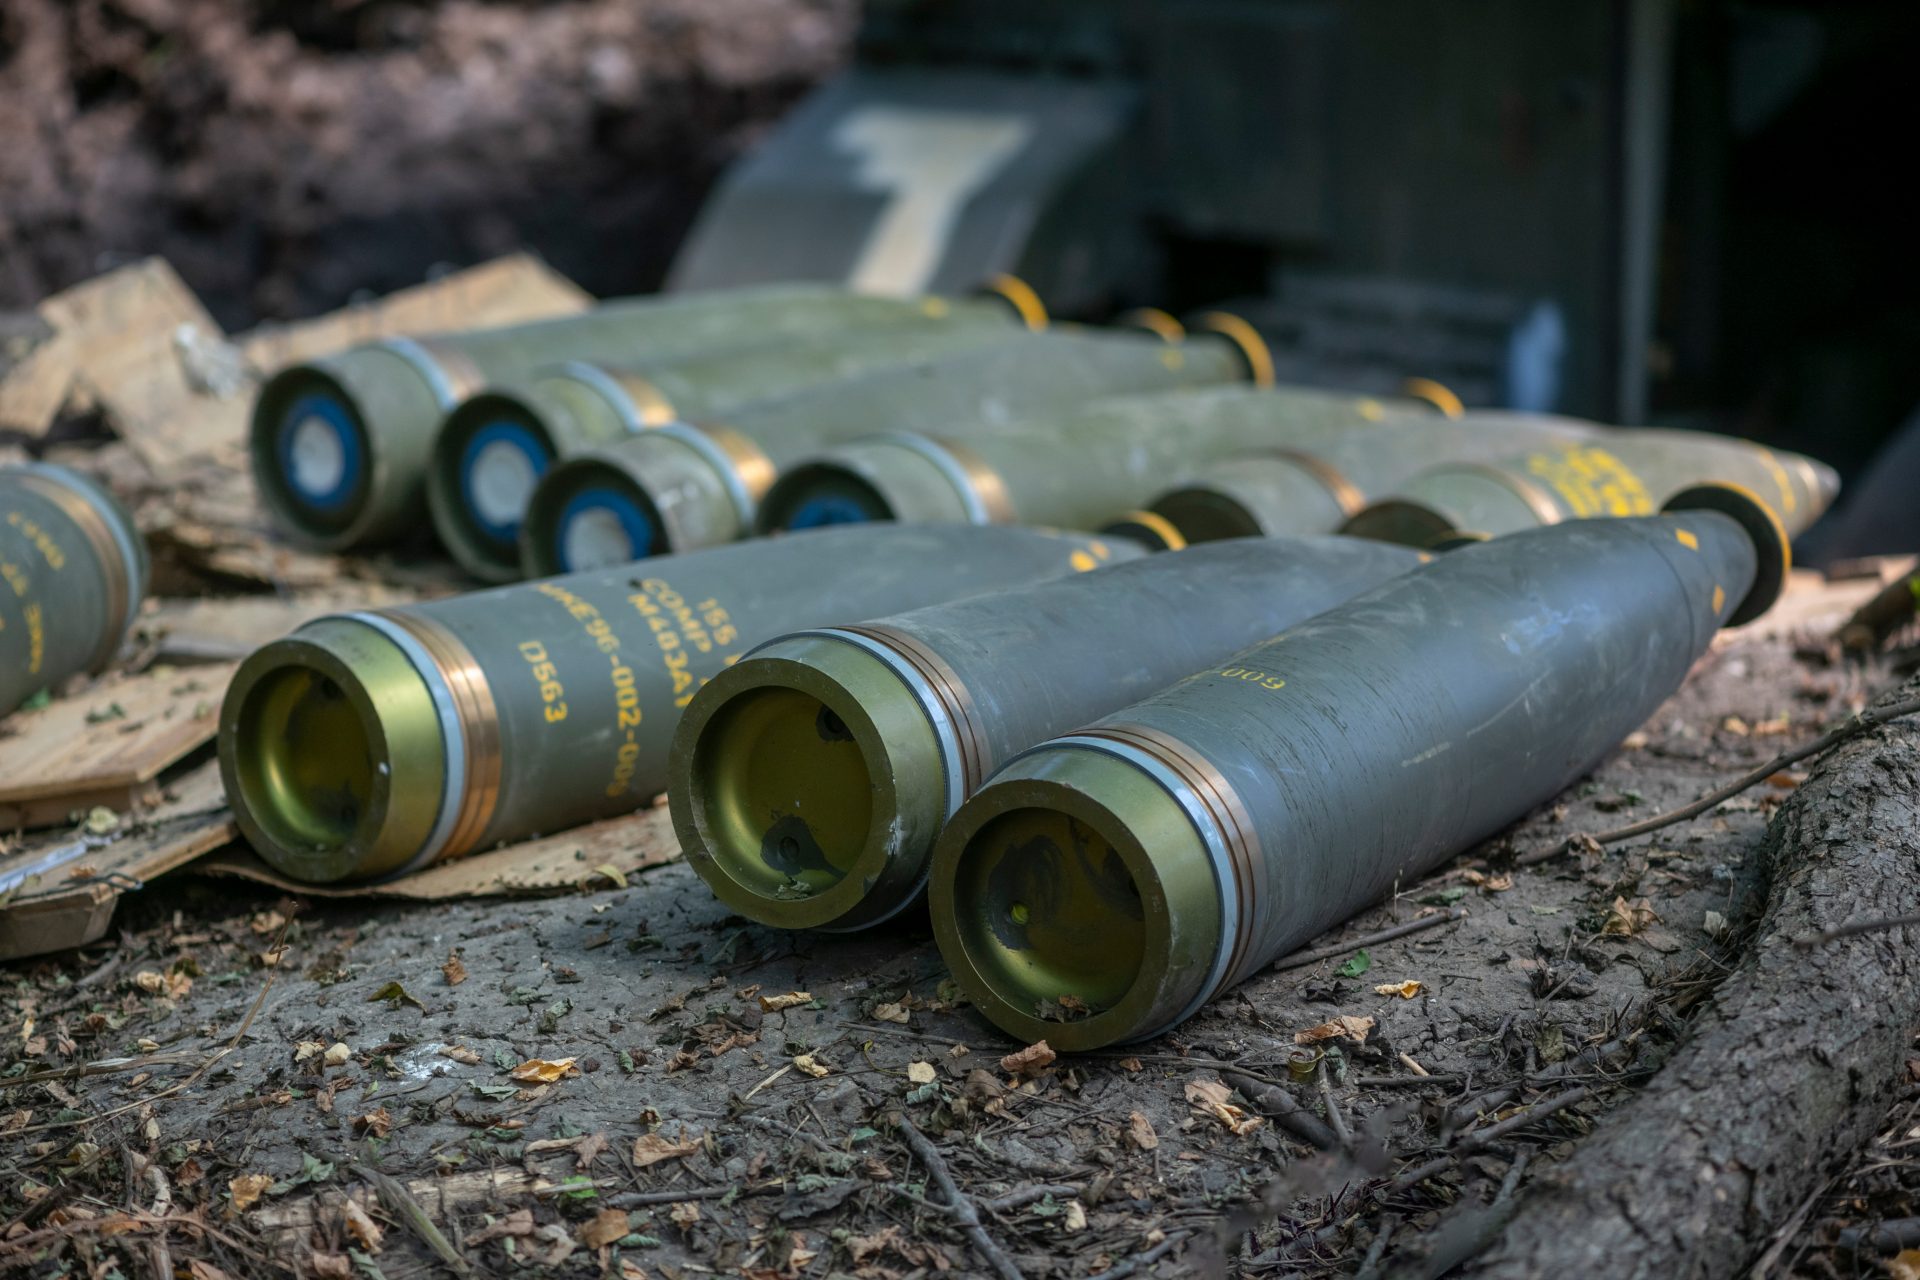 Russia and Ukraine are suffering from major ammunition issues